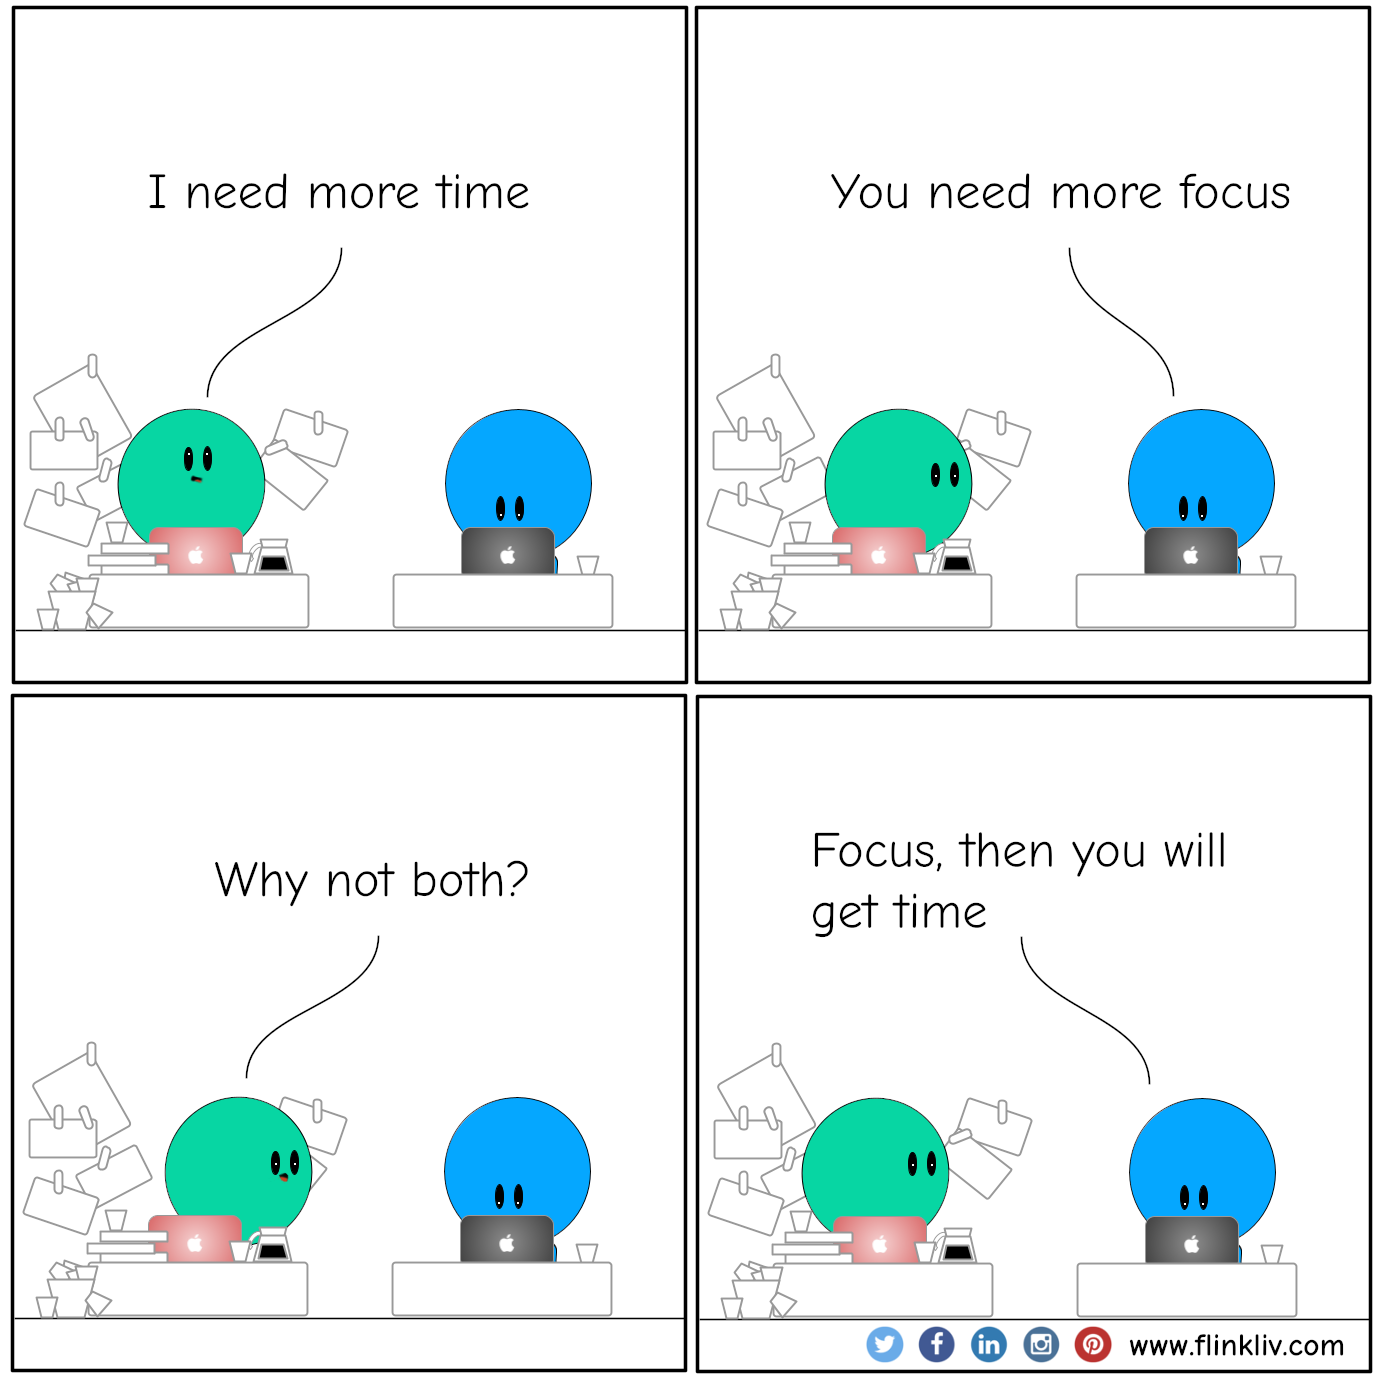 A conversation between A and B about how to do things
				A: I need more time
				B: You need more focus
				A: Why not both?
				B: Focus, then you will get time
              